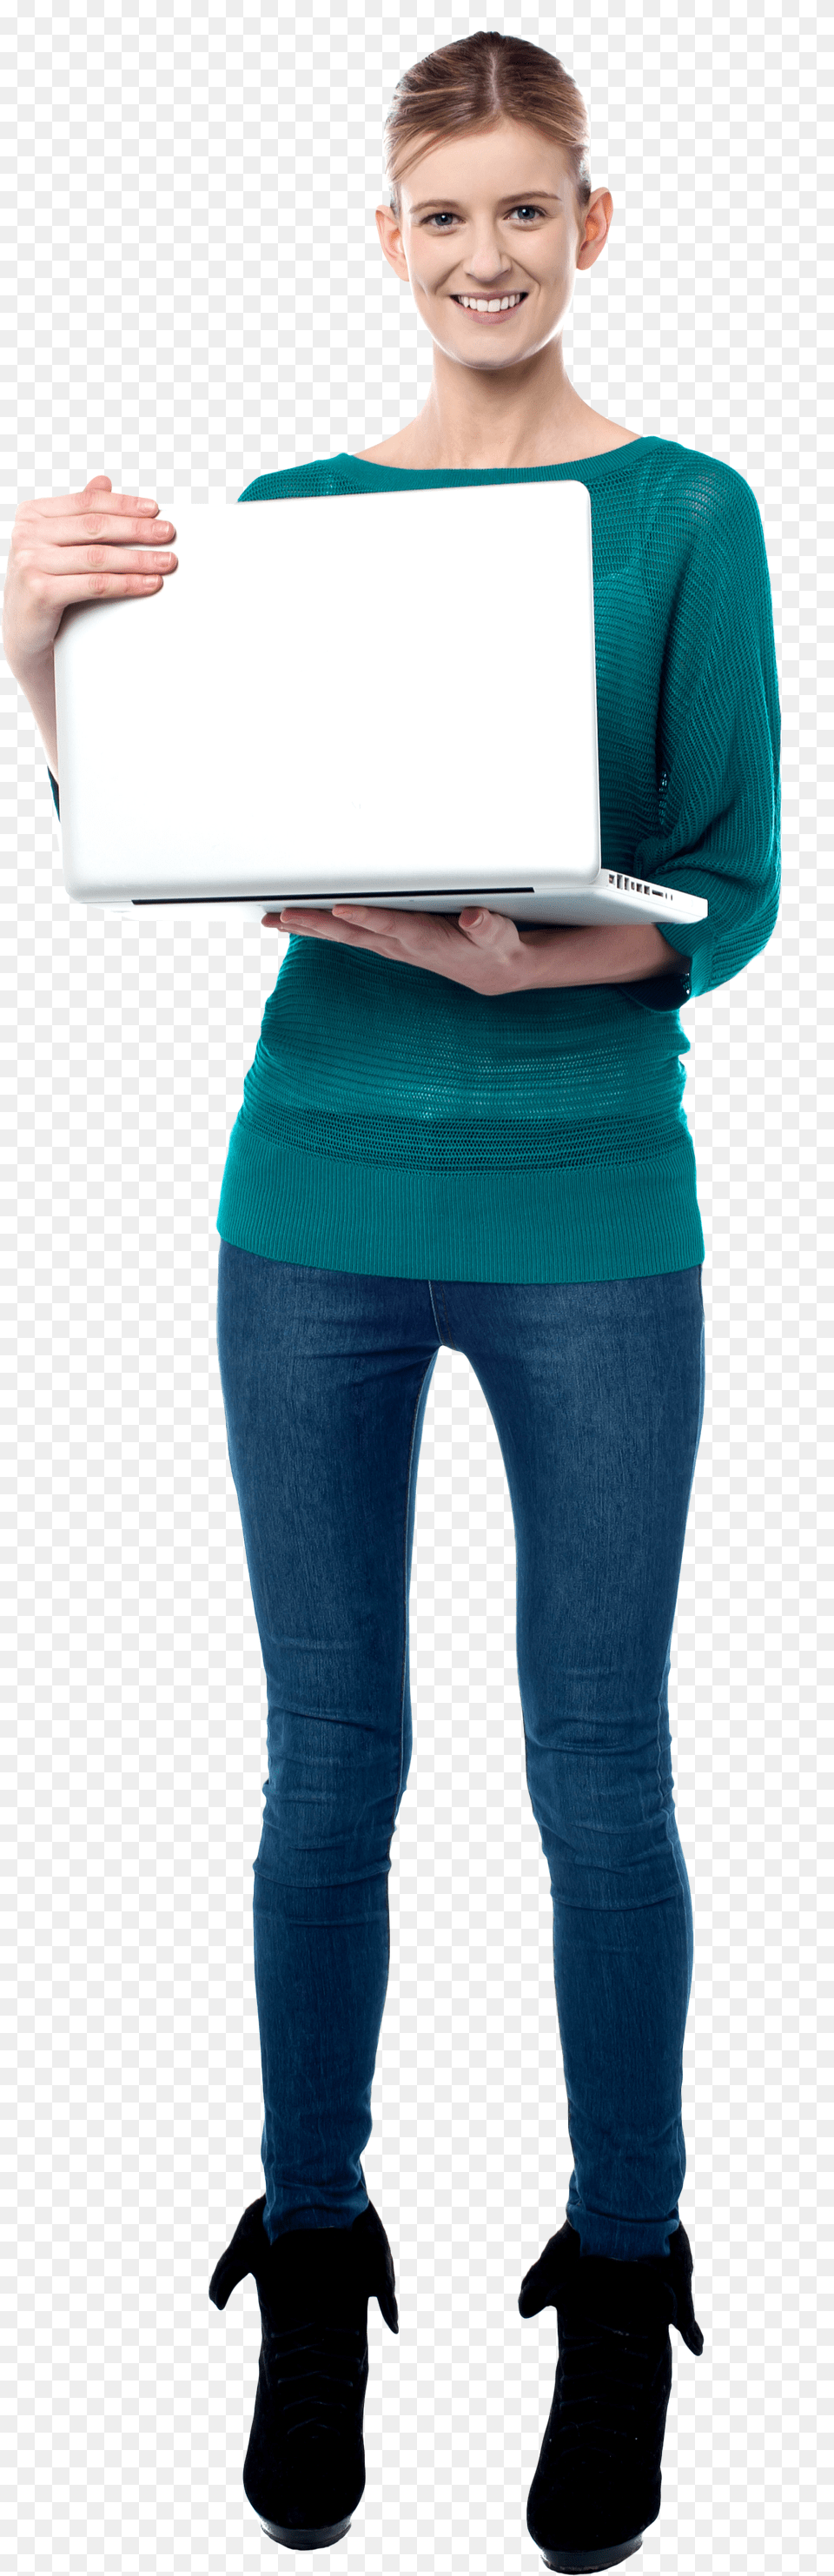 Standing Girl With Laptop Png Image